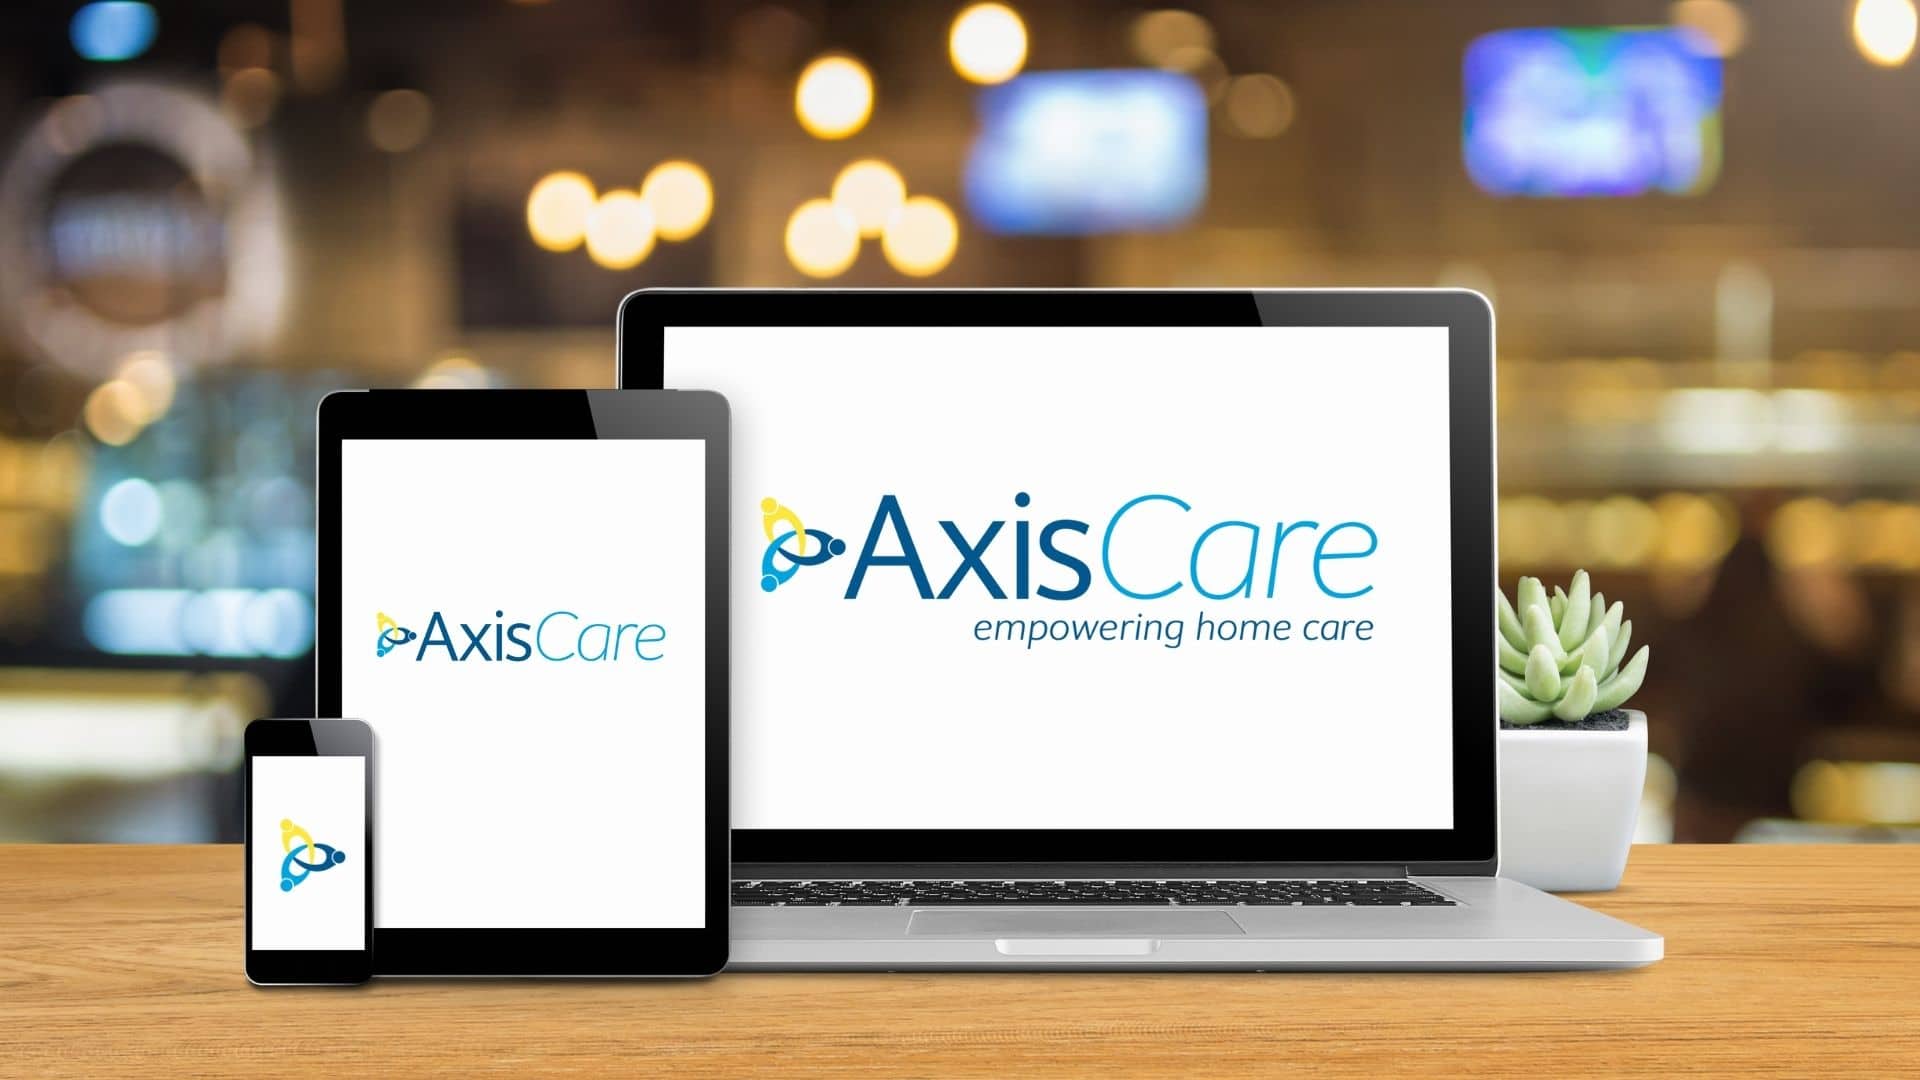 AxisCare home care software logo displayed on laptop, iPad and phone